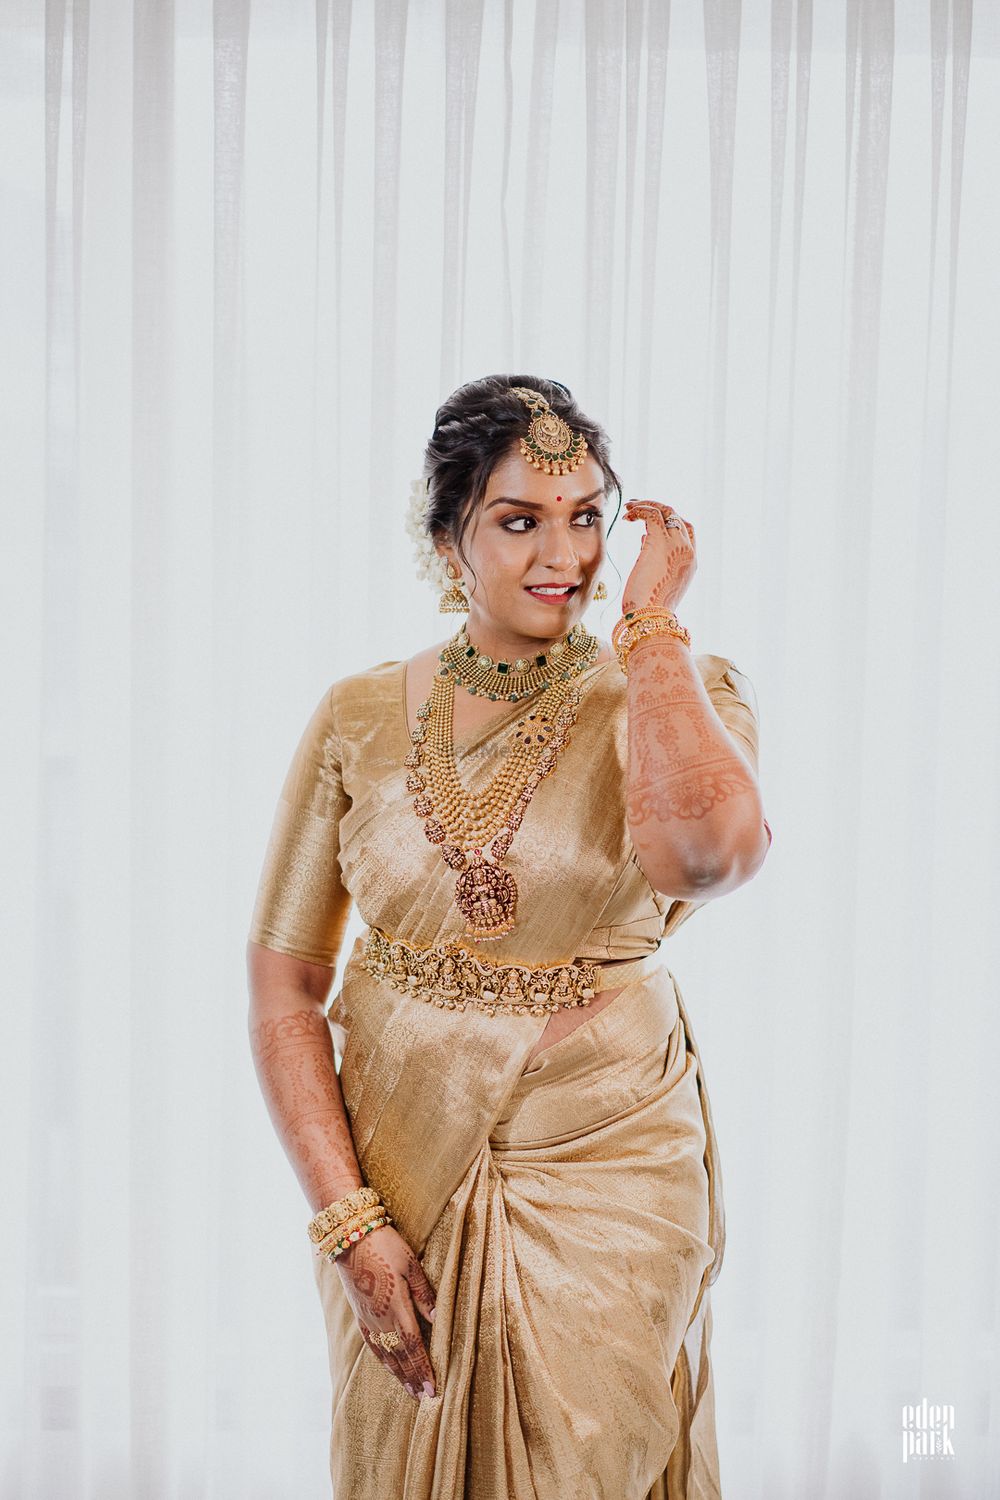 Photo From Mithun & Parvathy - By EdenPark Weddings